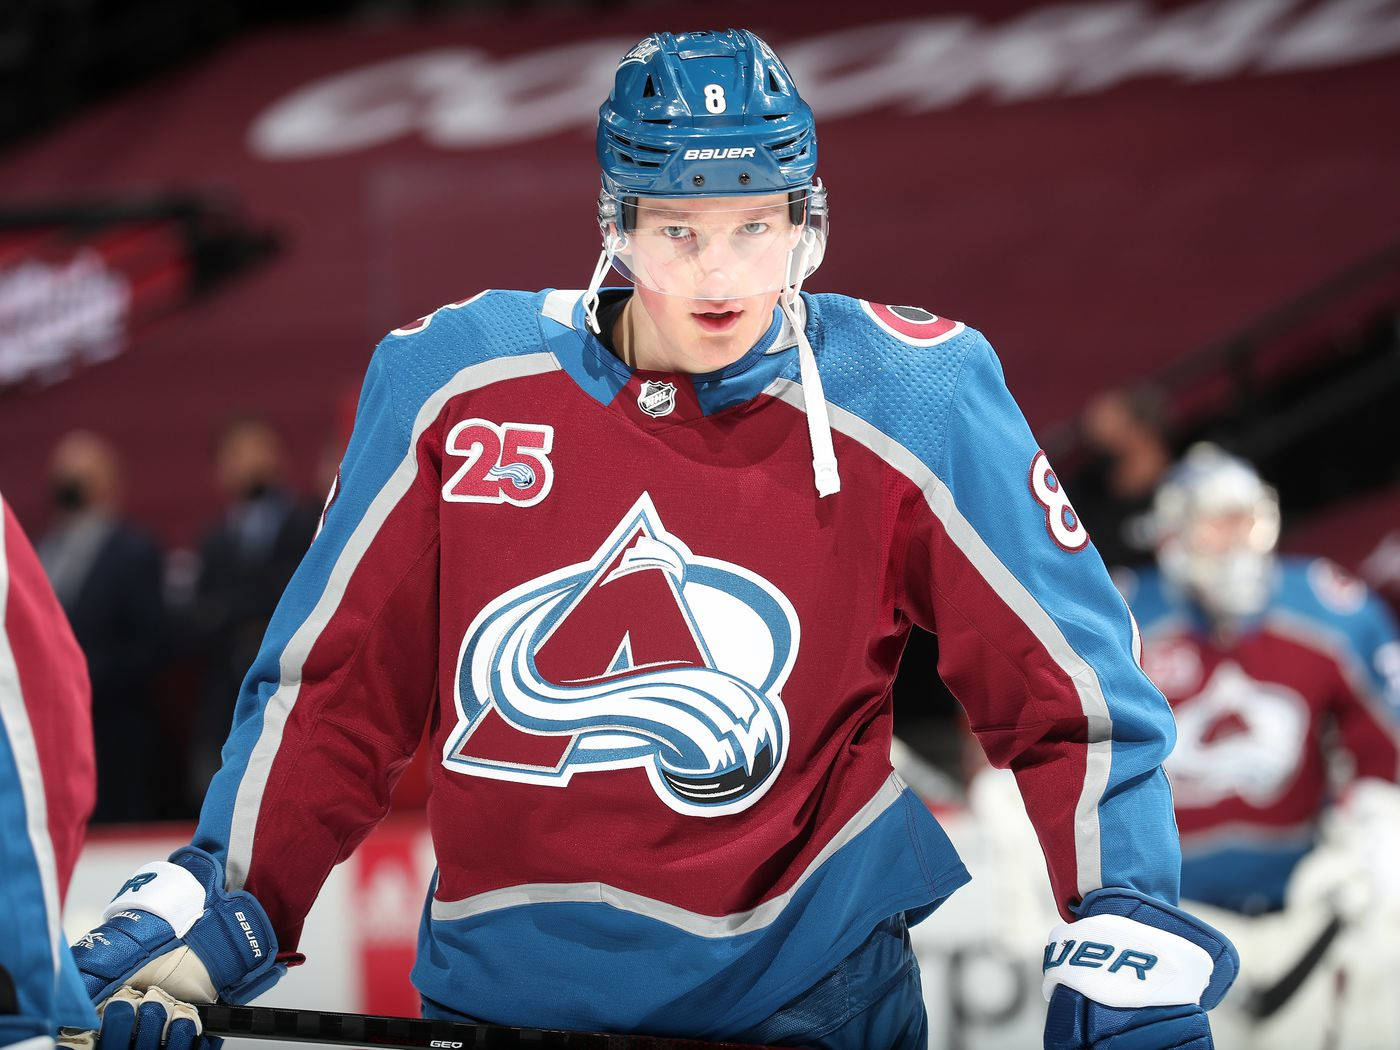 Download Cale Makar in Action Wearing Colorado Avalanche Jersey Wallpaper